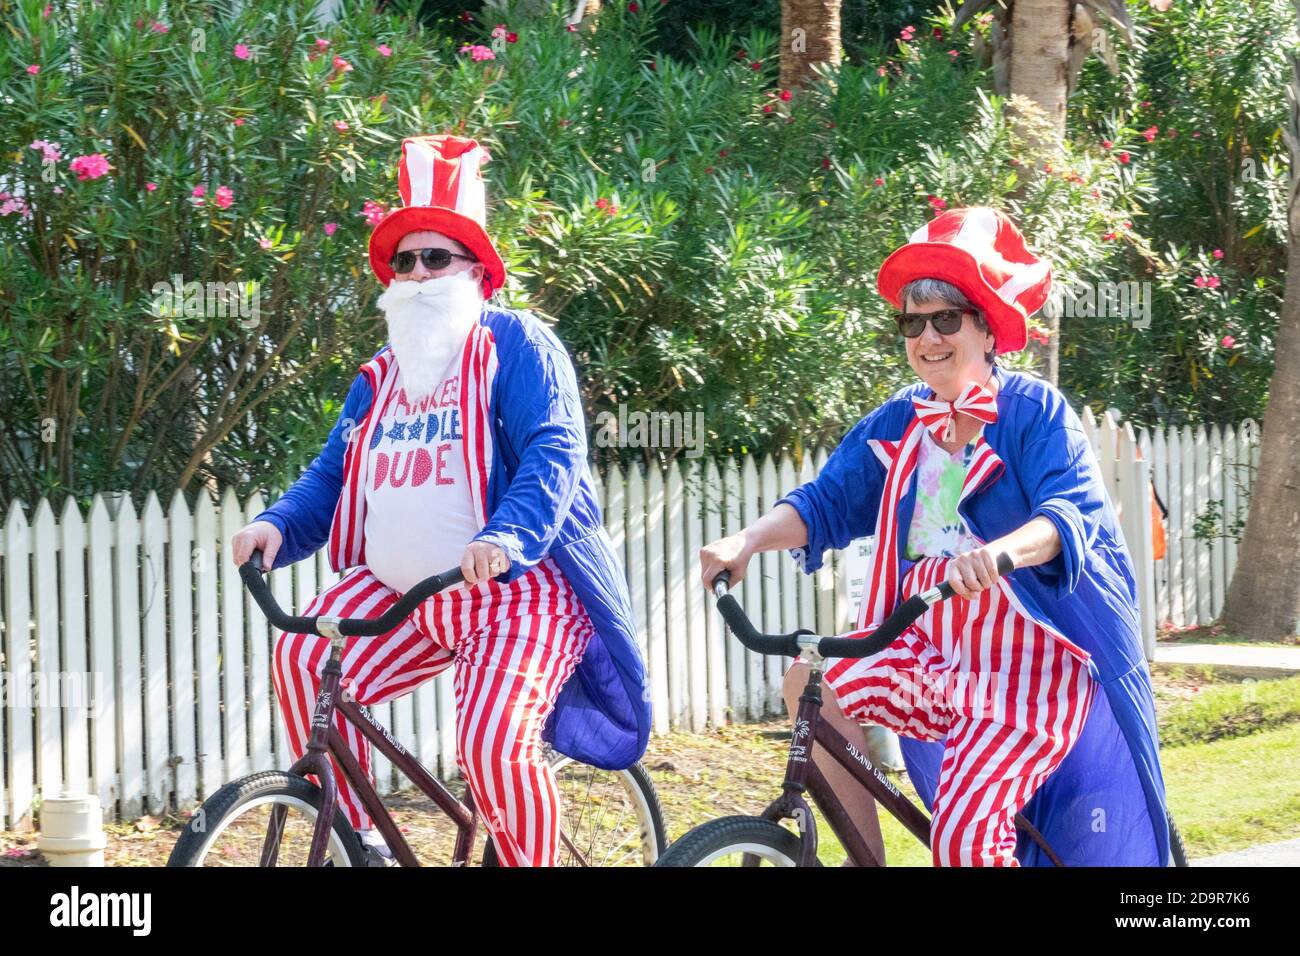 Dressed as Uncle Sam in patriotic colors bicyclists ride down the road during the annual Independence Day parade July 4, 2019 in Sullivan's Island, South Carolina. The tiny affluent Sea Island beach community across from Charleston holds an outsized golf cart parade featuring more than 75 decorated carts. Stock Photo